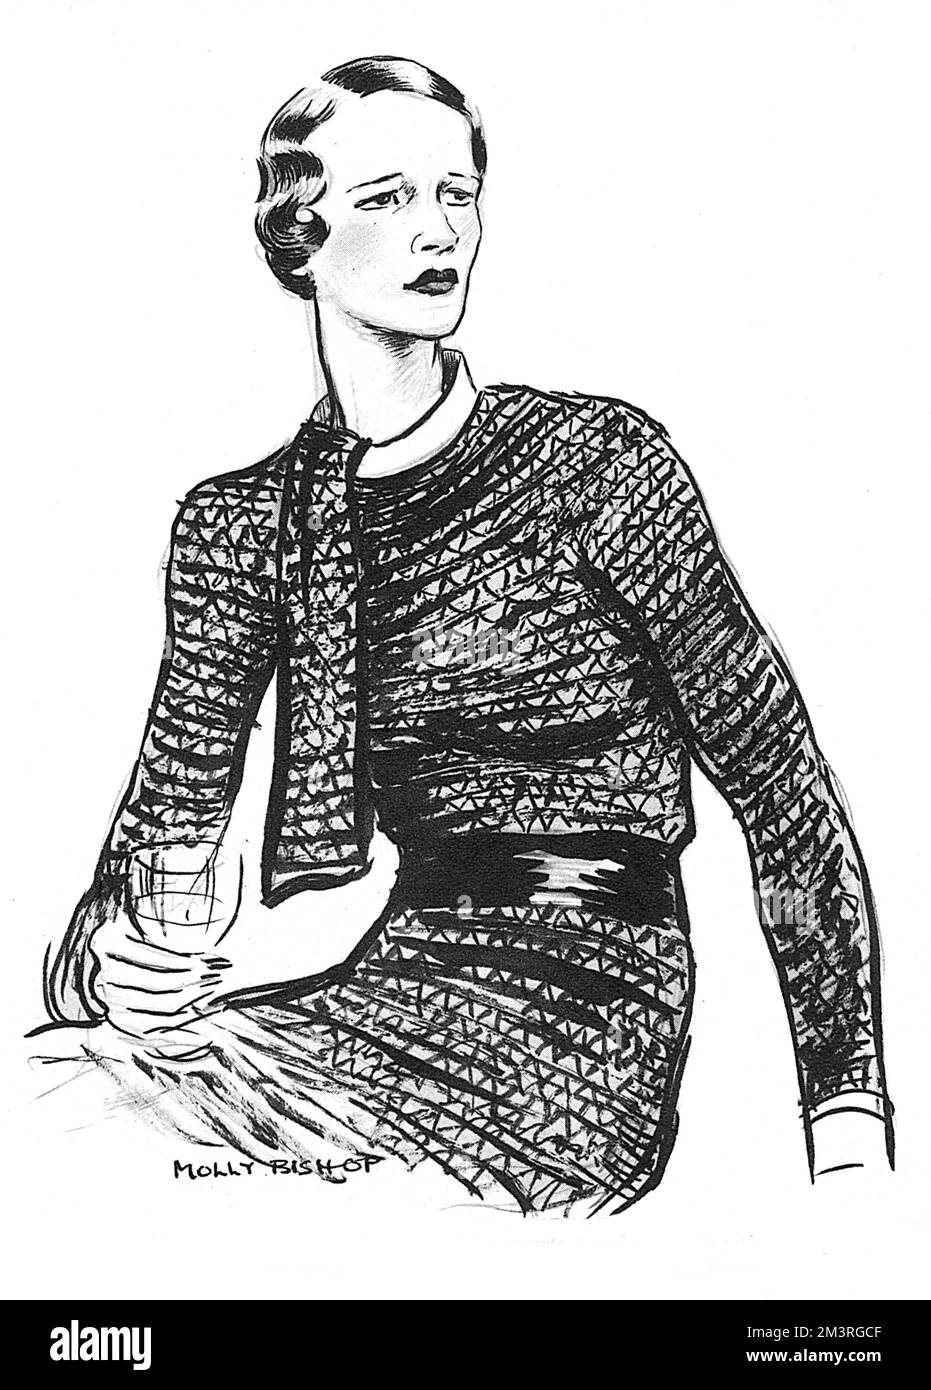 Sallie Monkland, an American member of high society in London, pictured in the dress she wore for a cocktail party at her Carlos Place house.  The Bystander magazine describes it as, 'an amusing Schiaparelli dress of a shiny black material, with a starched white 'clerical' collar'.      Date: 1934 Stock Photo